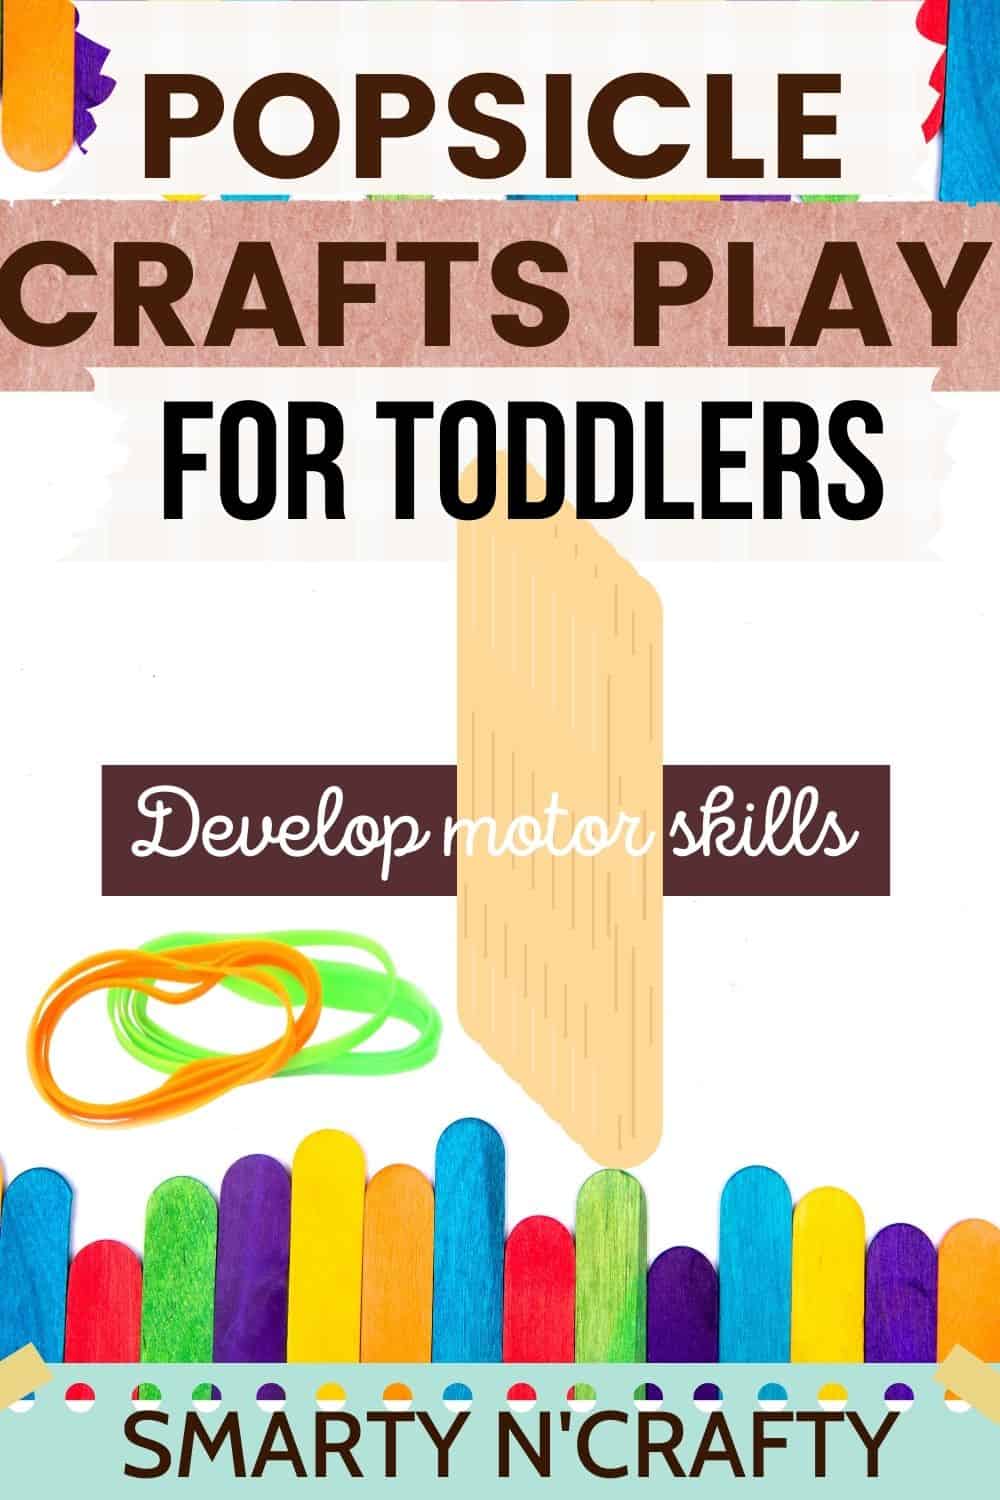 popsicle crafts play